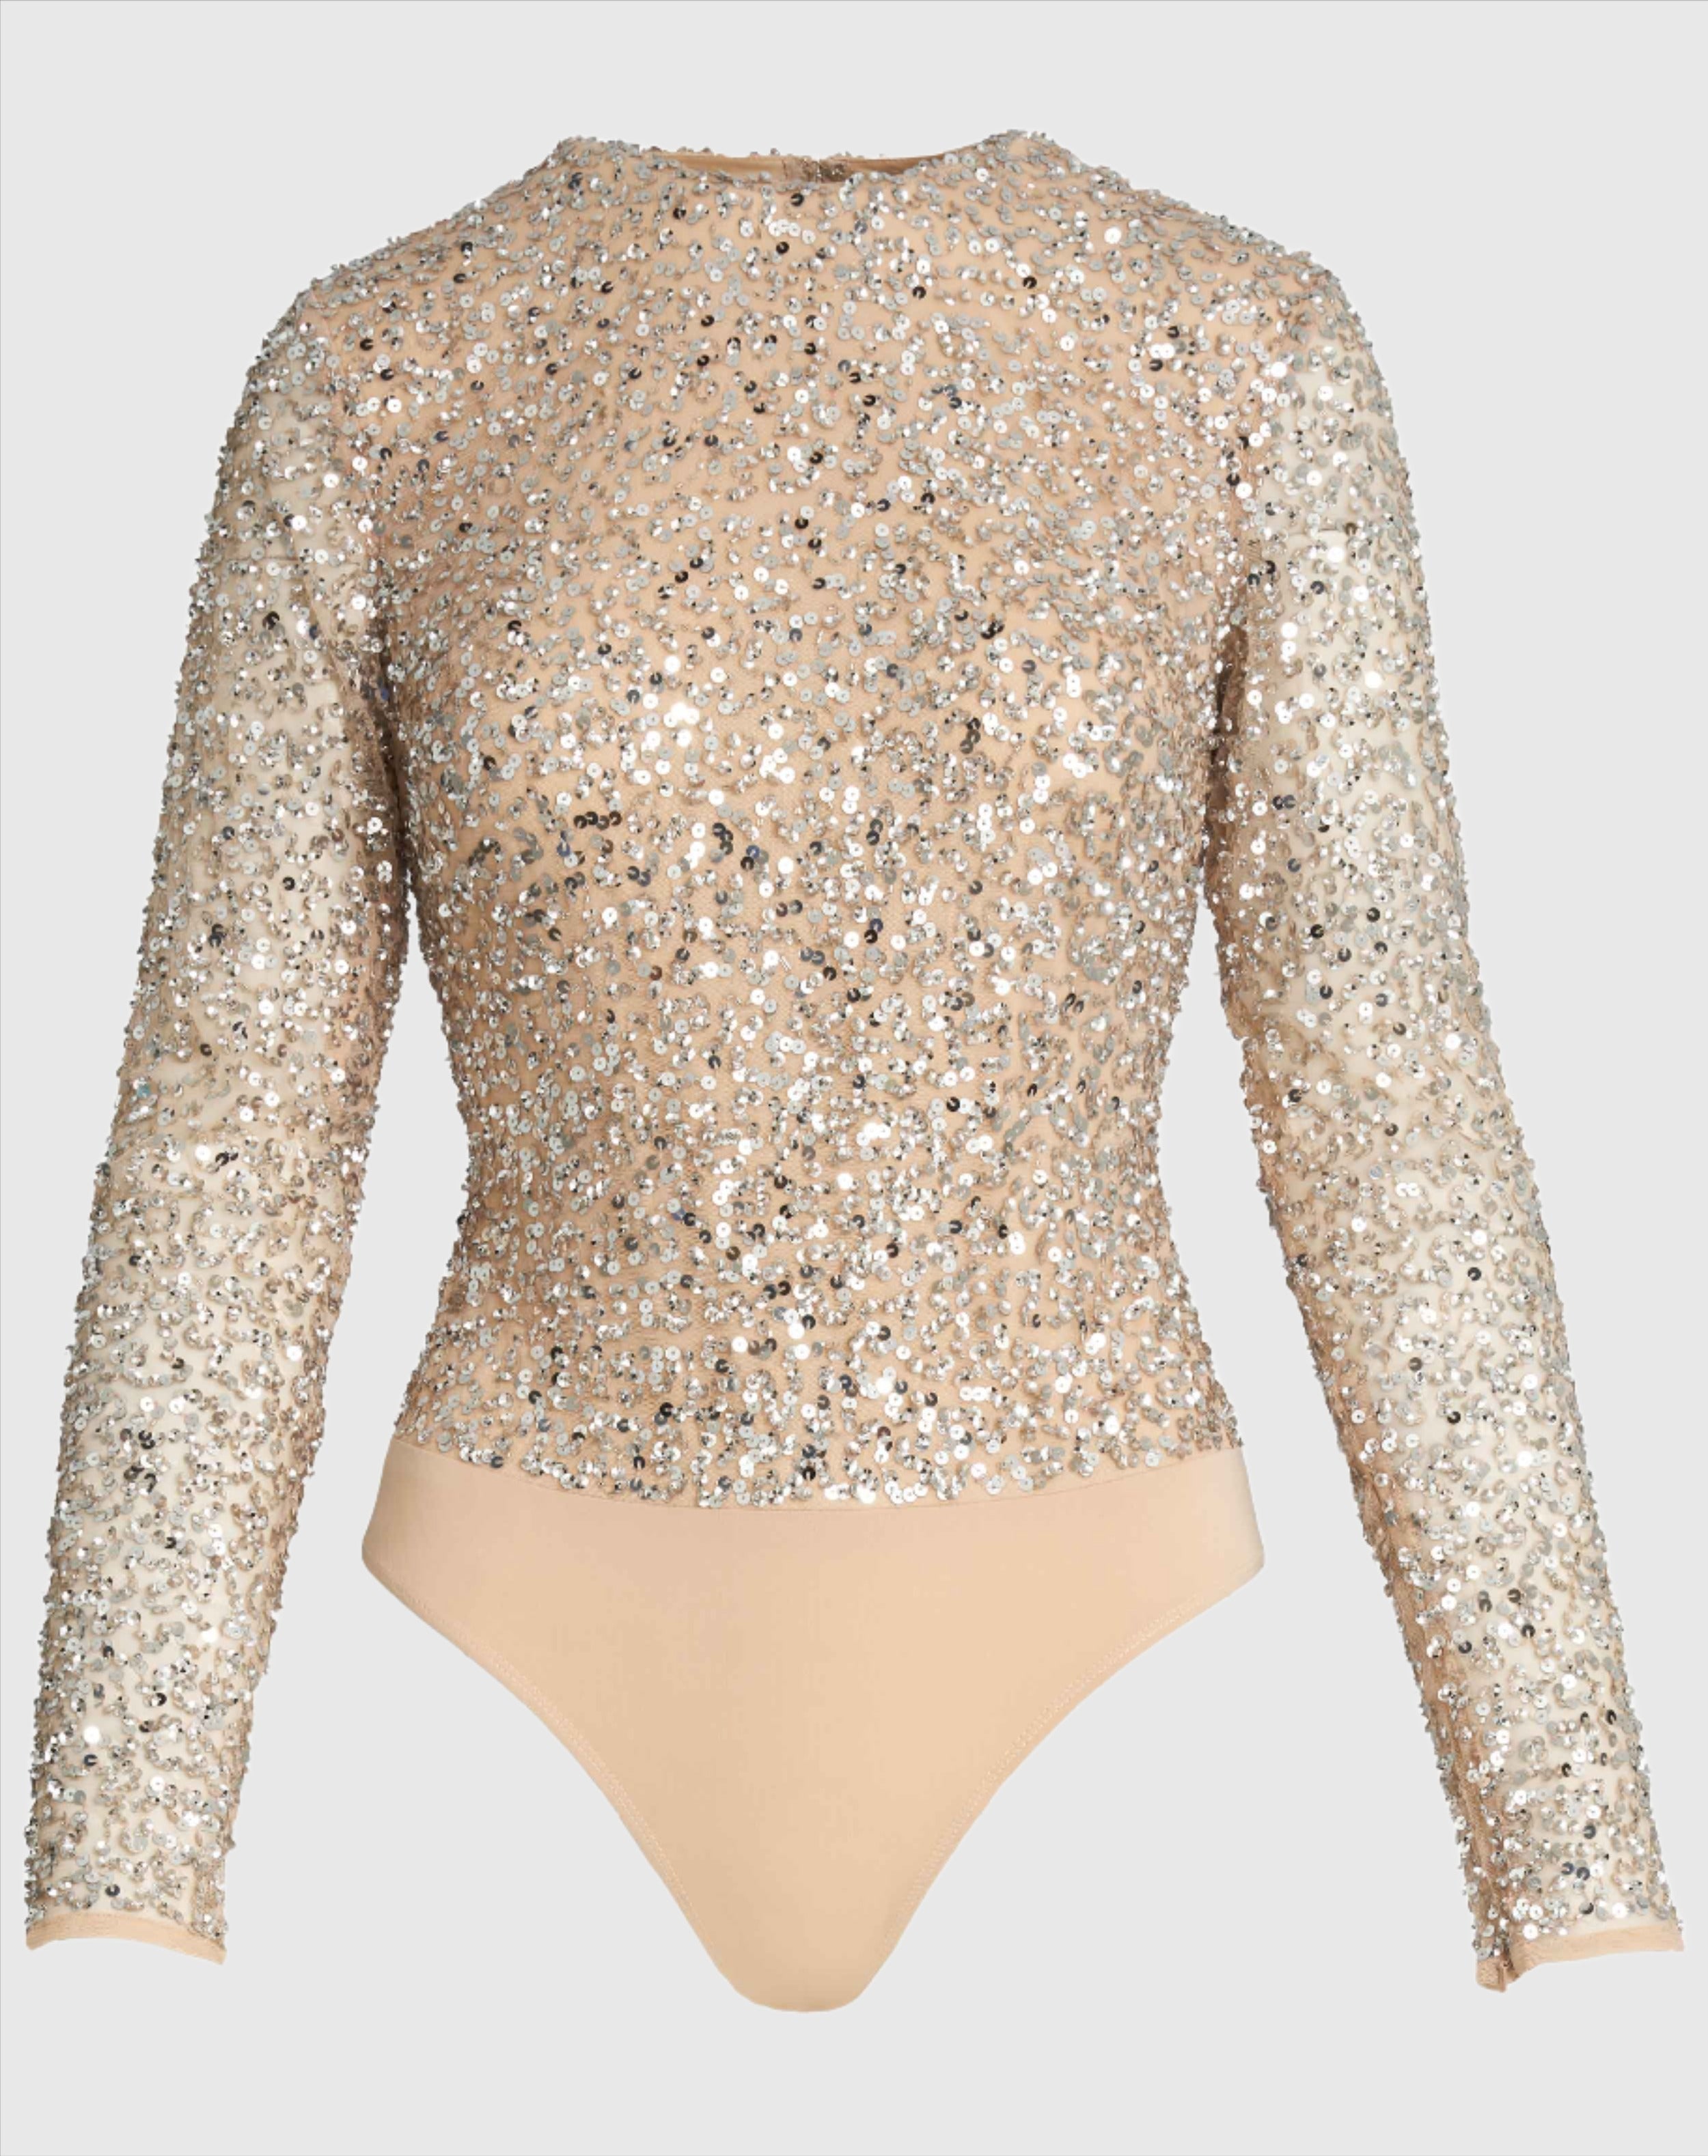 Nude Bodysuit w/ Sheer Sleeves and Silver Sequins